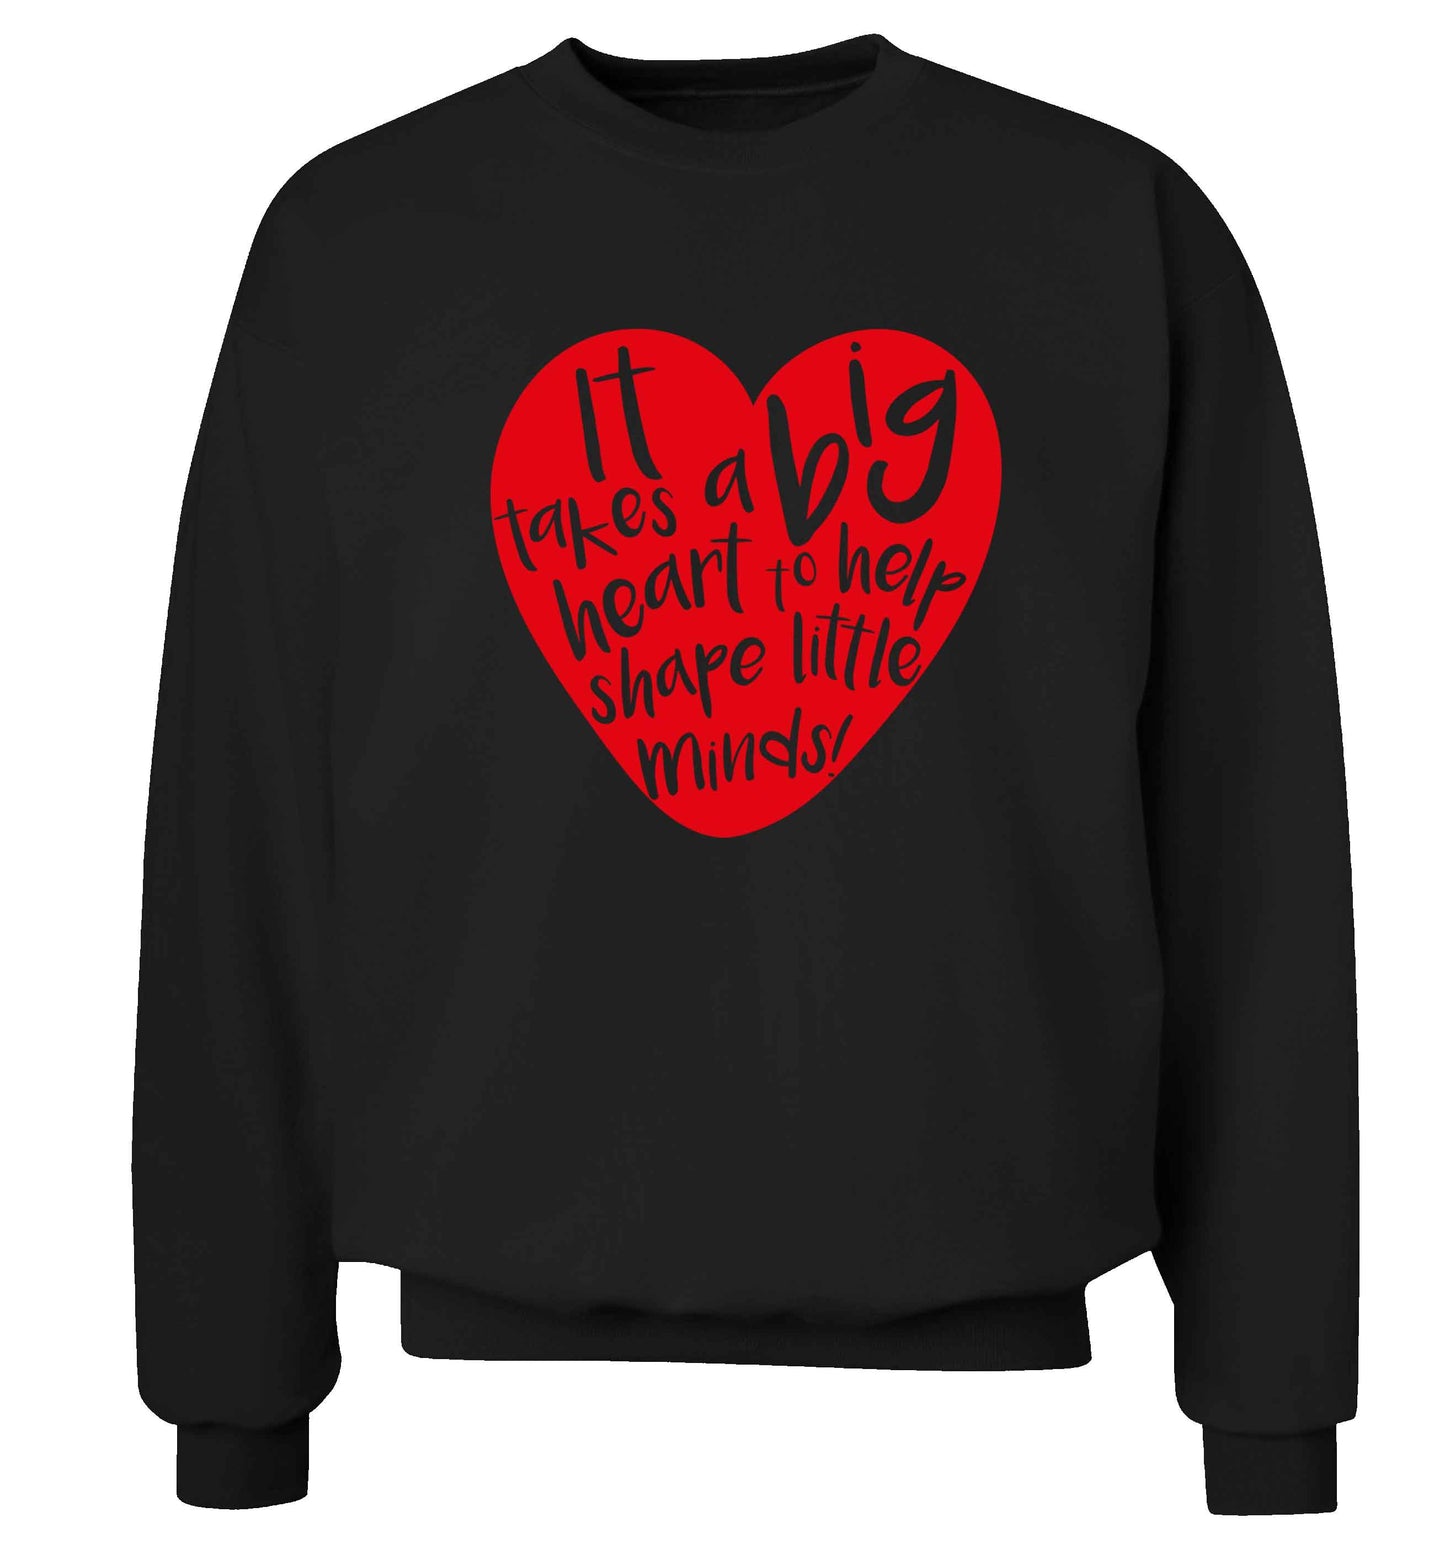 It takes a big heart to help shape little minds adult's unisex black sweater 2XL